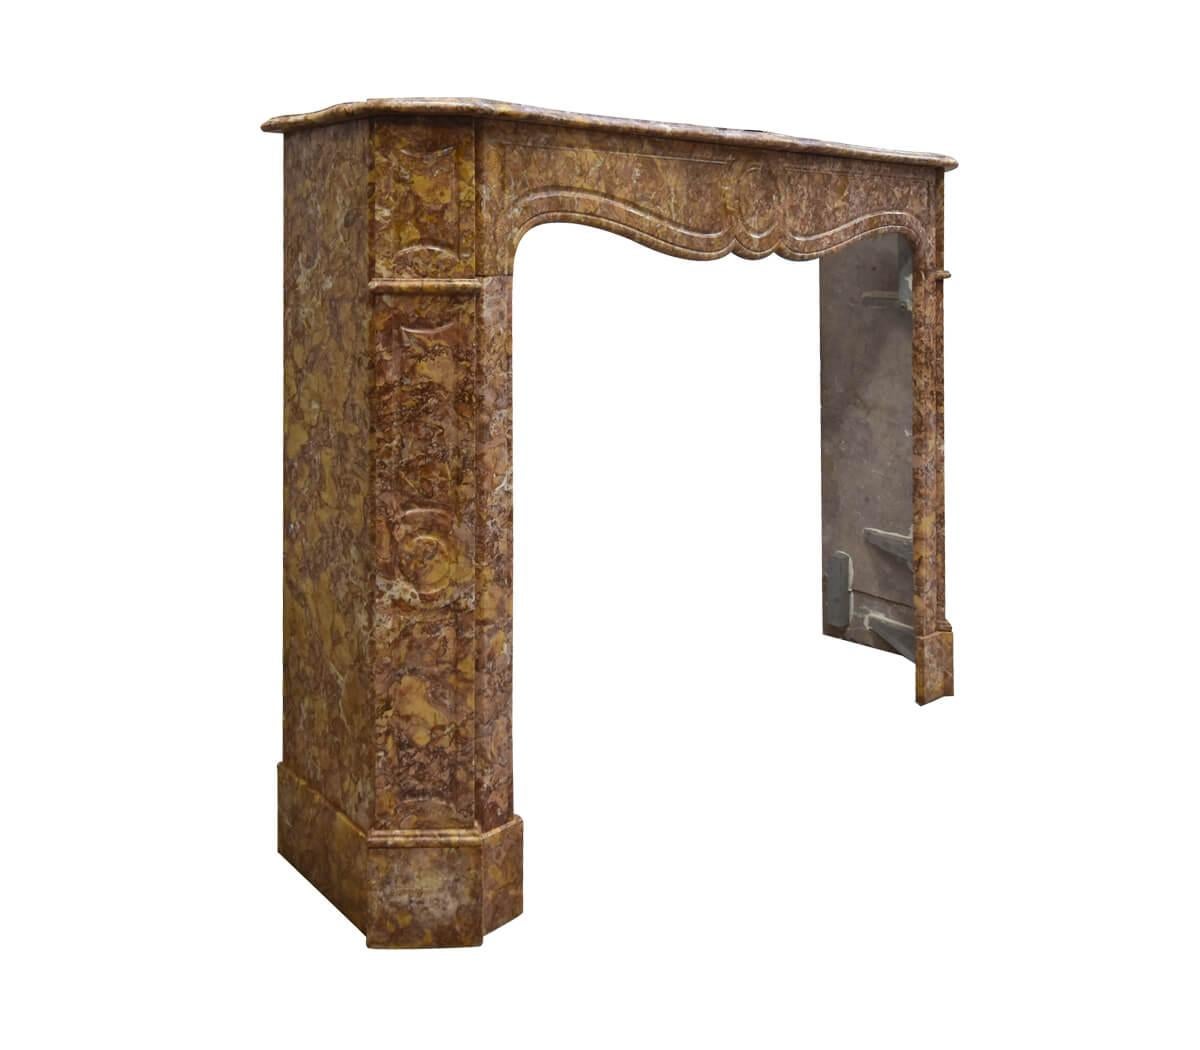 Marble fireplace mantel from the 19th Century.
To place in front of the chimney, type Pompadour.